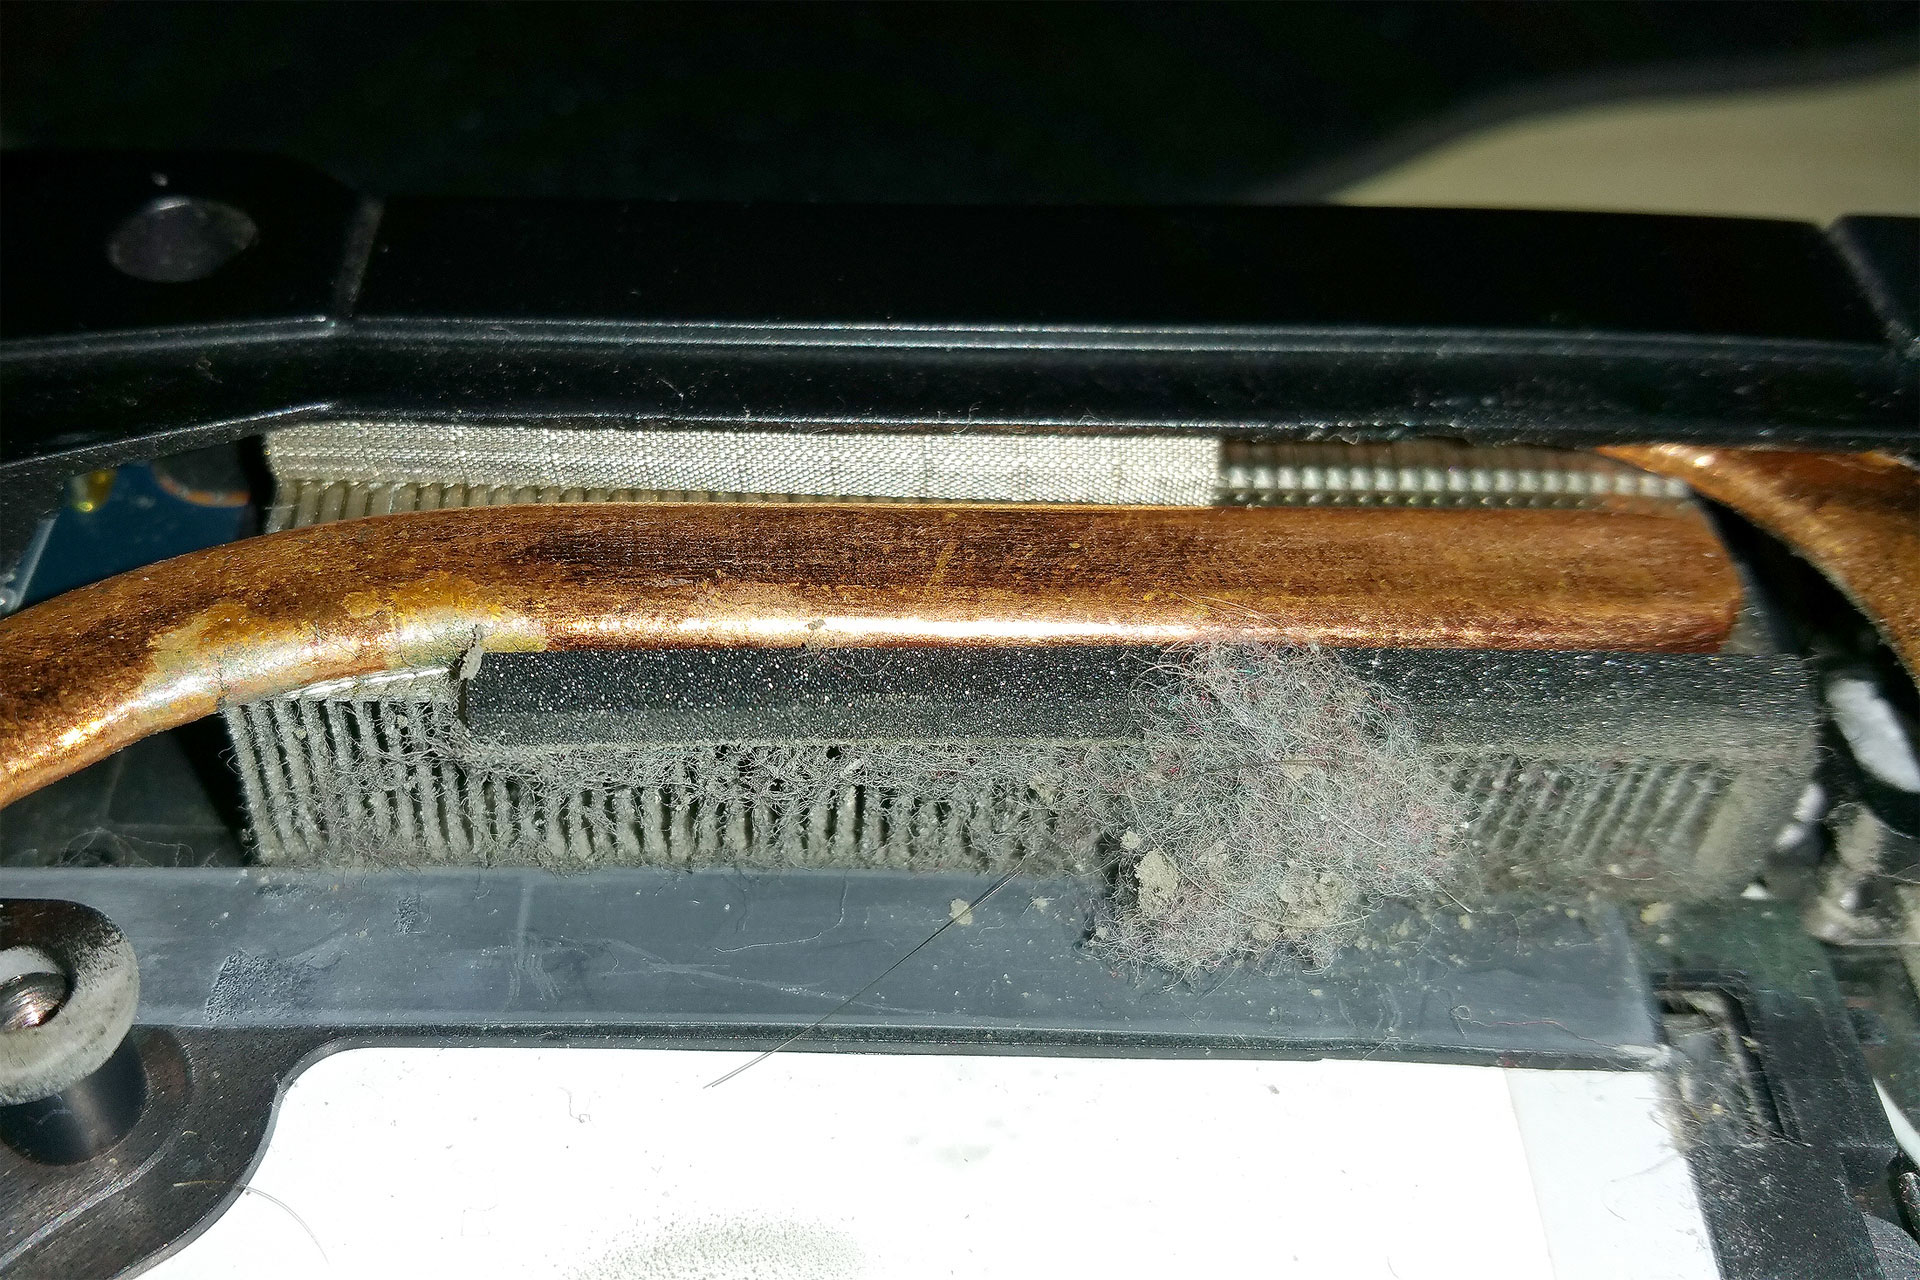 The reason my laptop was overheating